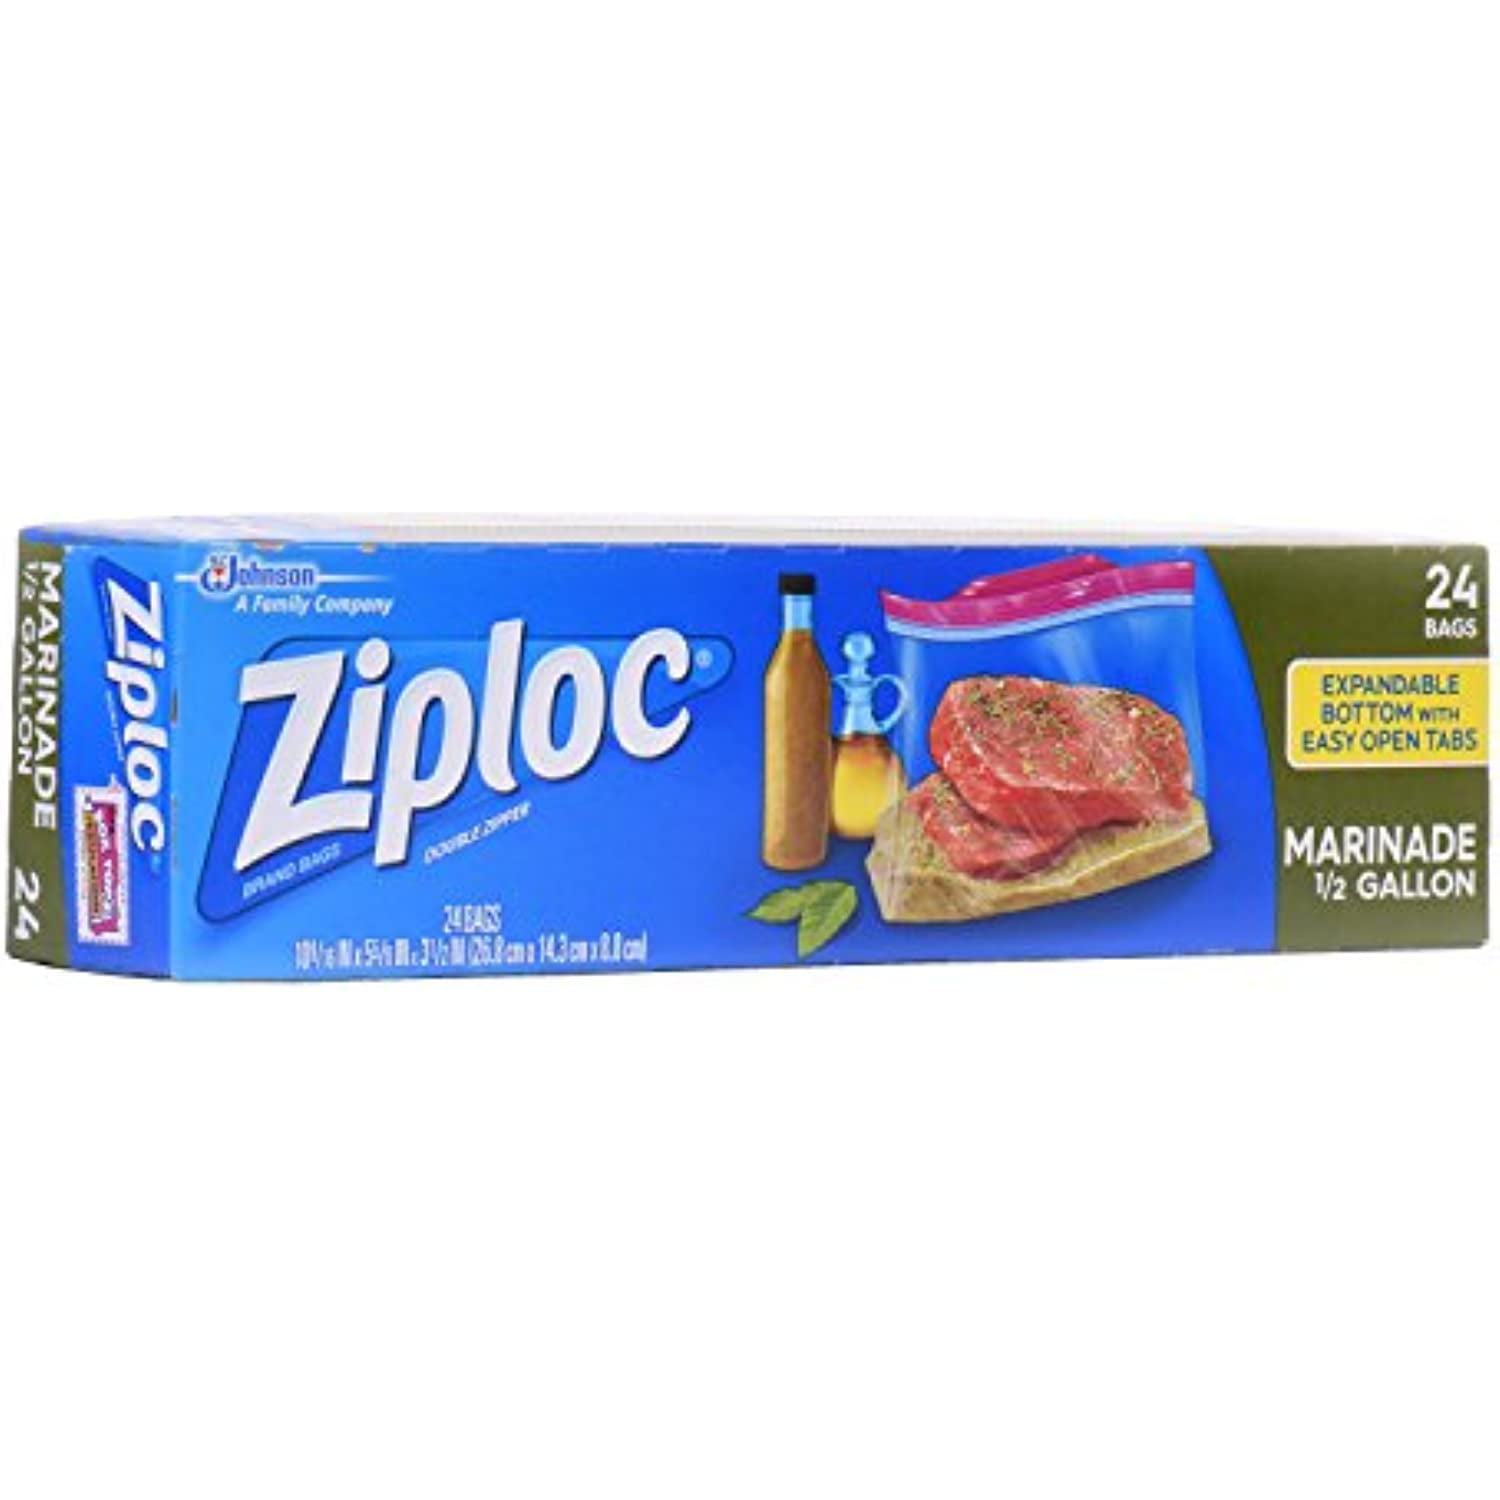 Ziploc Marinade Bags, Expandable Bottom With Easy Open Tabs, Half Gallon,  24 Count, Pack Of 3 (72 Total Bags) 